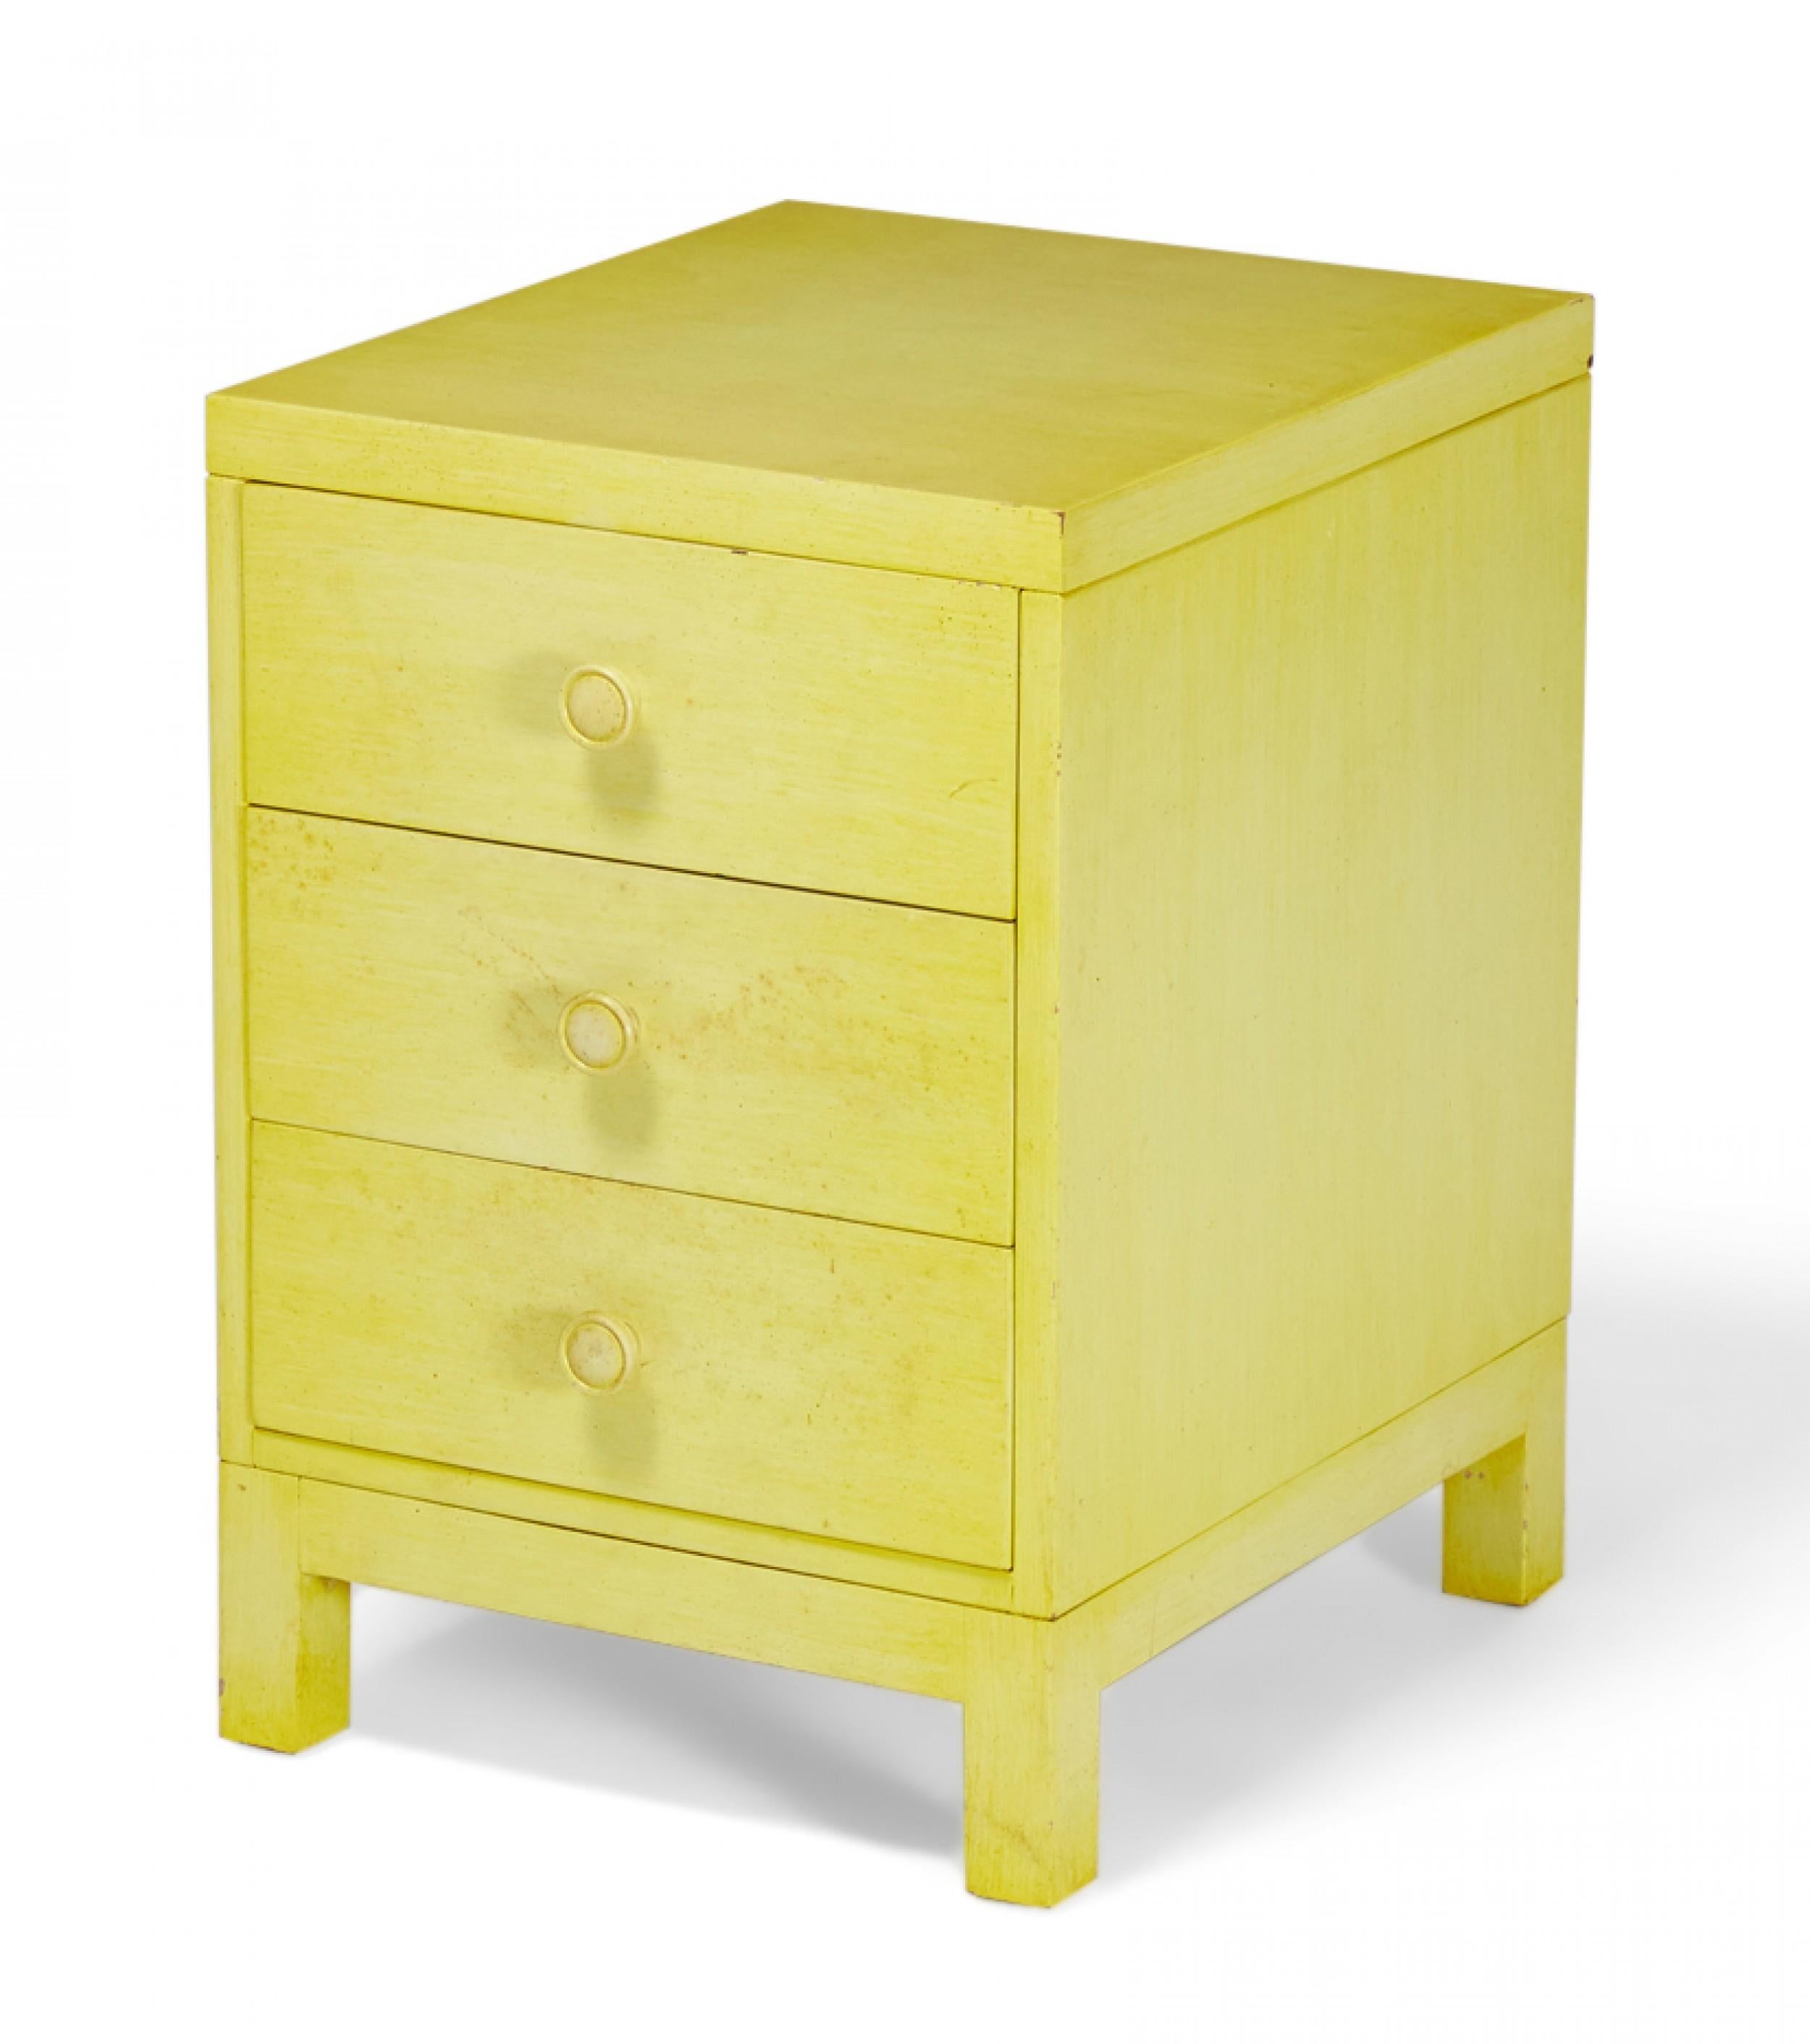 American Mid-Century beige painted walnut bedside table / nightstand with three drawers with circular beige painted drawer pulls resting on four square legs. (Widdicomb Modern)(Similar nightstands: DUF0155A, DUF0155C).
     